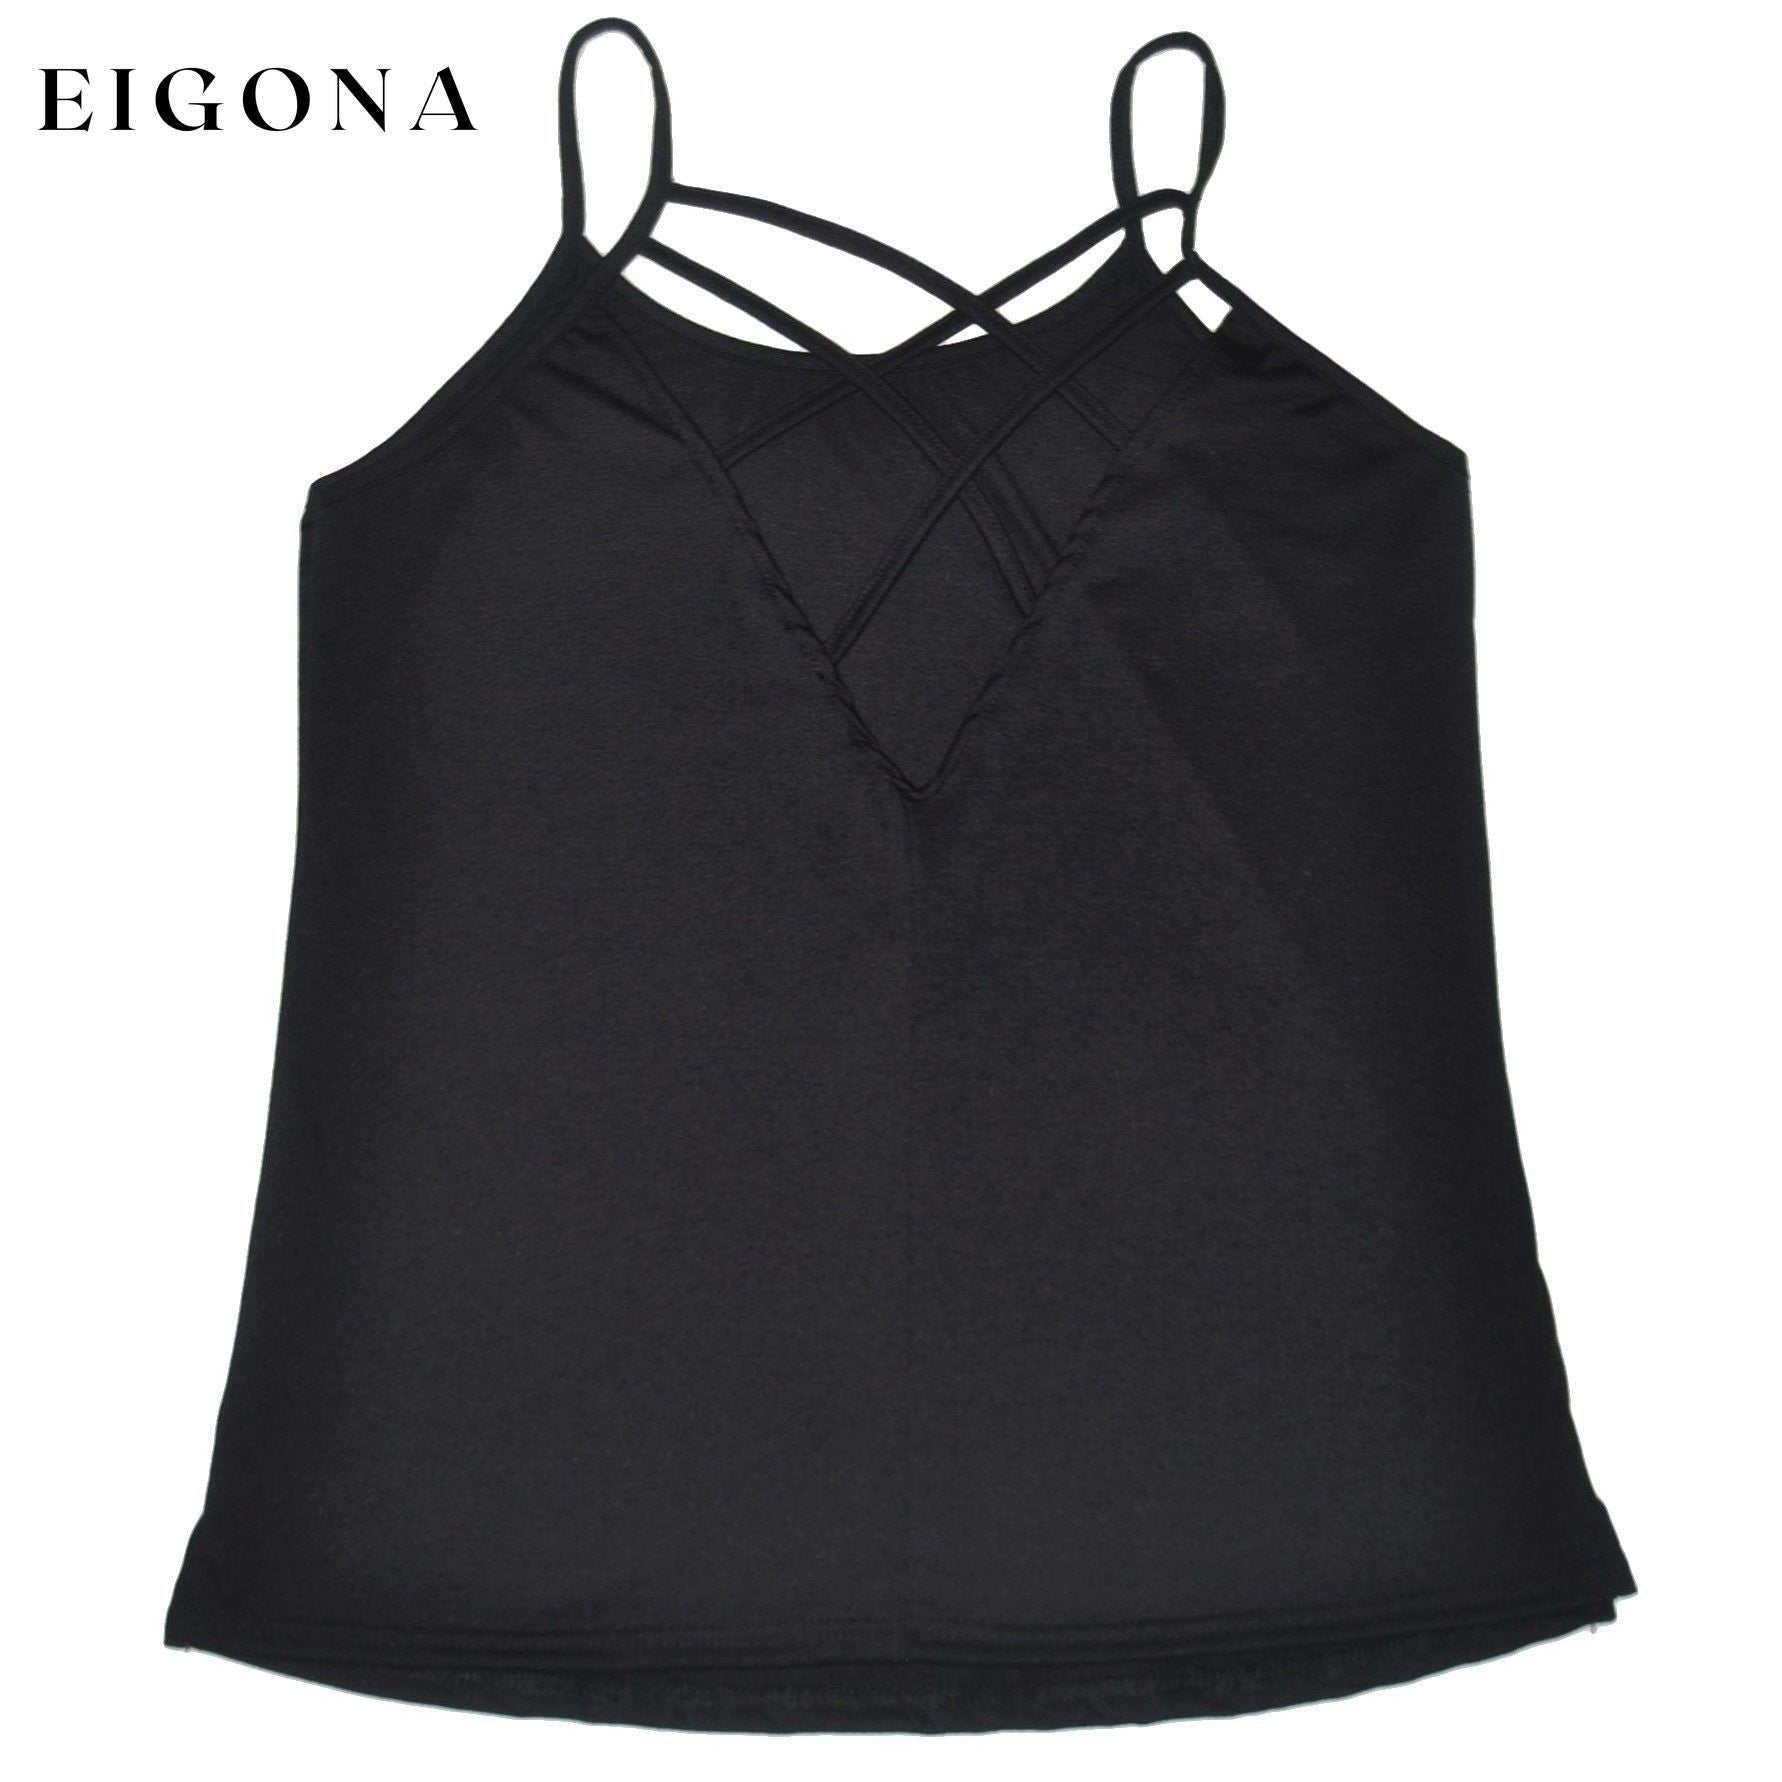 Comfy Casual Stylish Top with Criss-Cross Back Design __stock:50 clothes refund_fee:800 tops